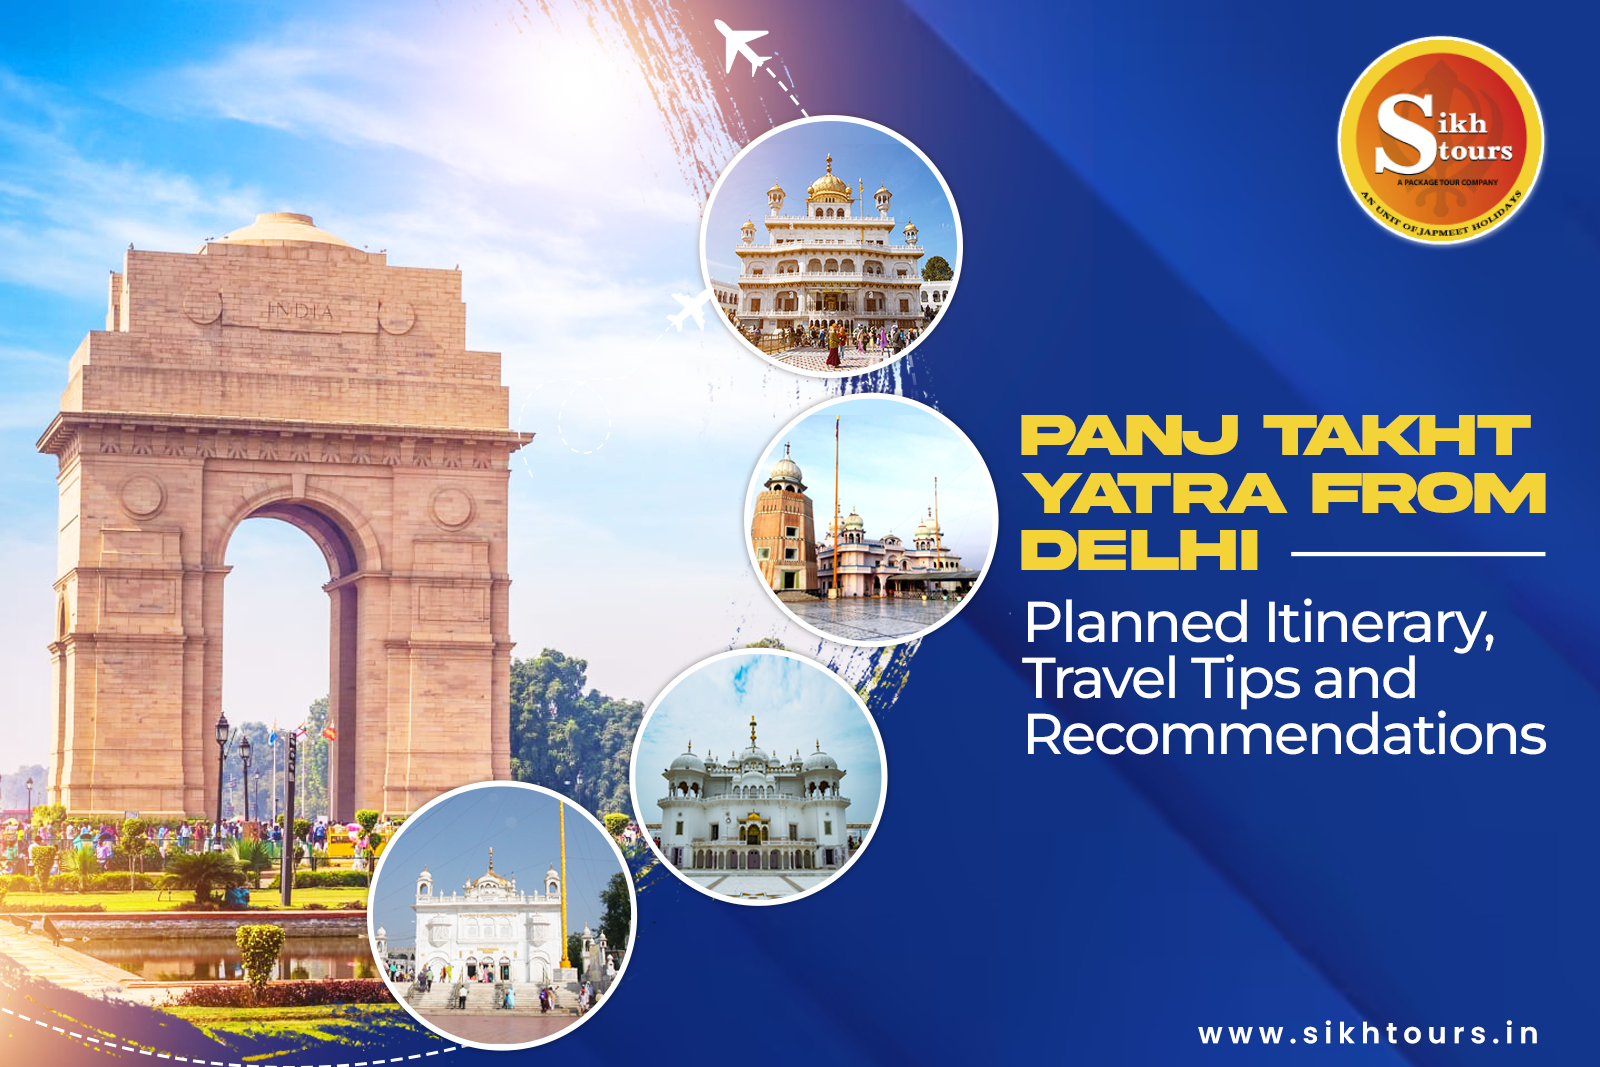 Panj Takht Yatra from Delhi: Planned Itinerary, Travel Tips & Recommendations